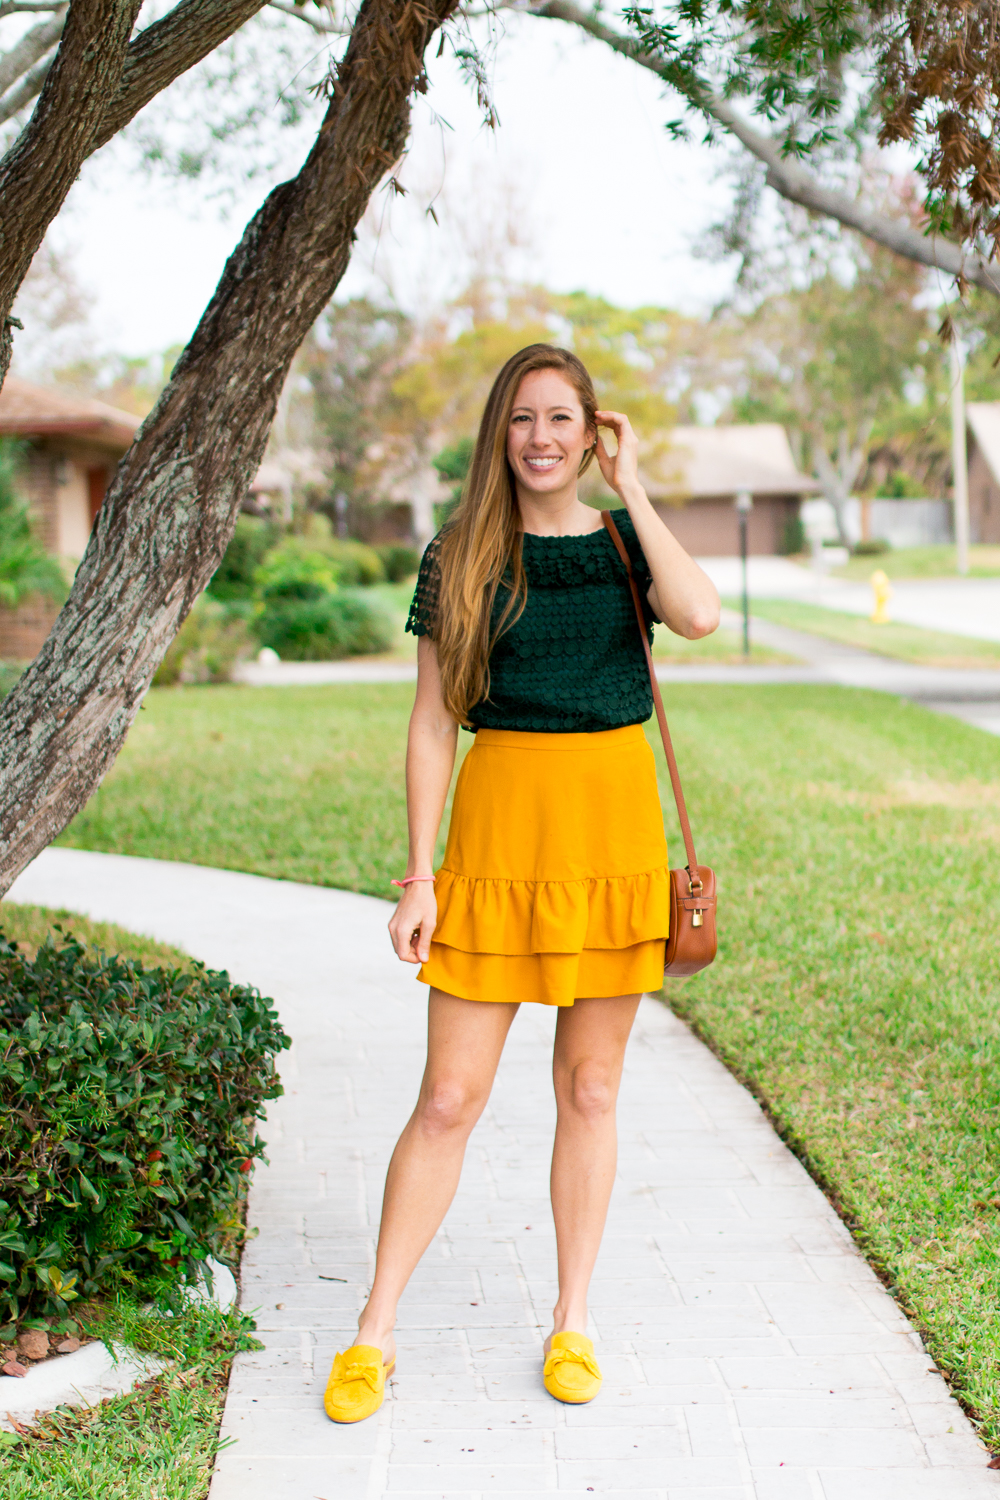 Mixing and Matching Seasonal Colors into Your Wardrobe | How to Dress for Fall | How to Incorporate Fall Colors in Your Wardrobe | Fall Outfit Ideas 2018 _ J.Crew Mustard Yellow Ruffle Skirt | Emerald Top | J.Crew Leather Bag- Sunshine Style